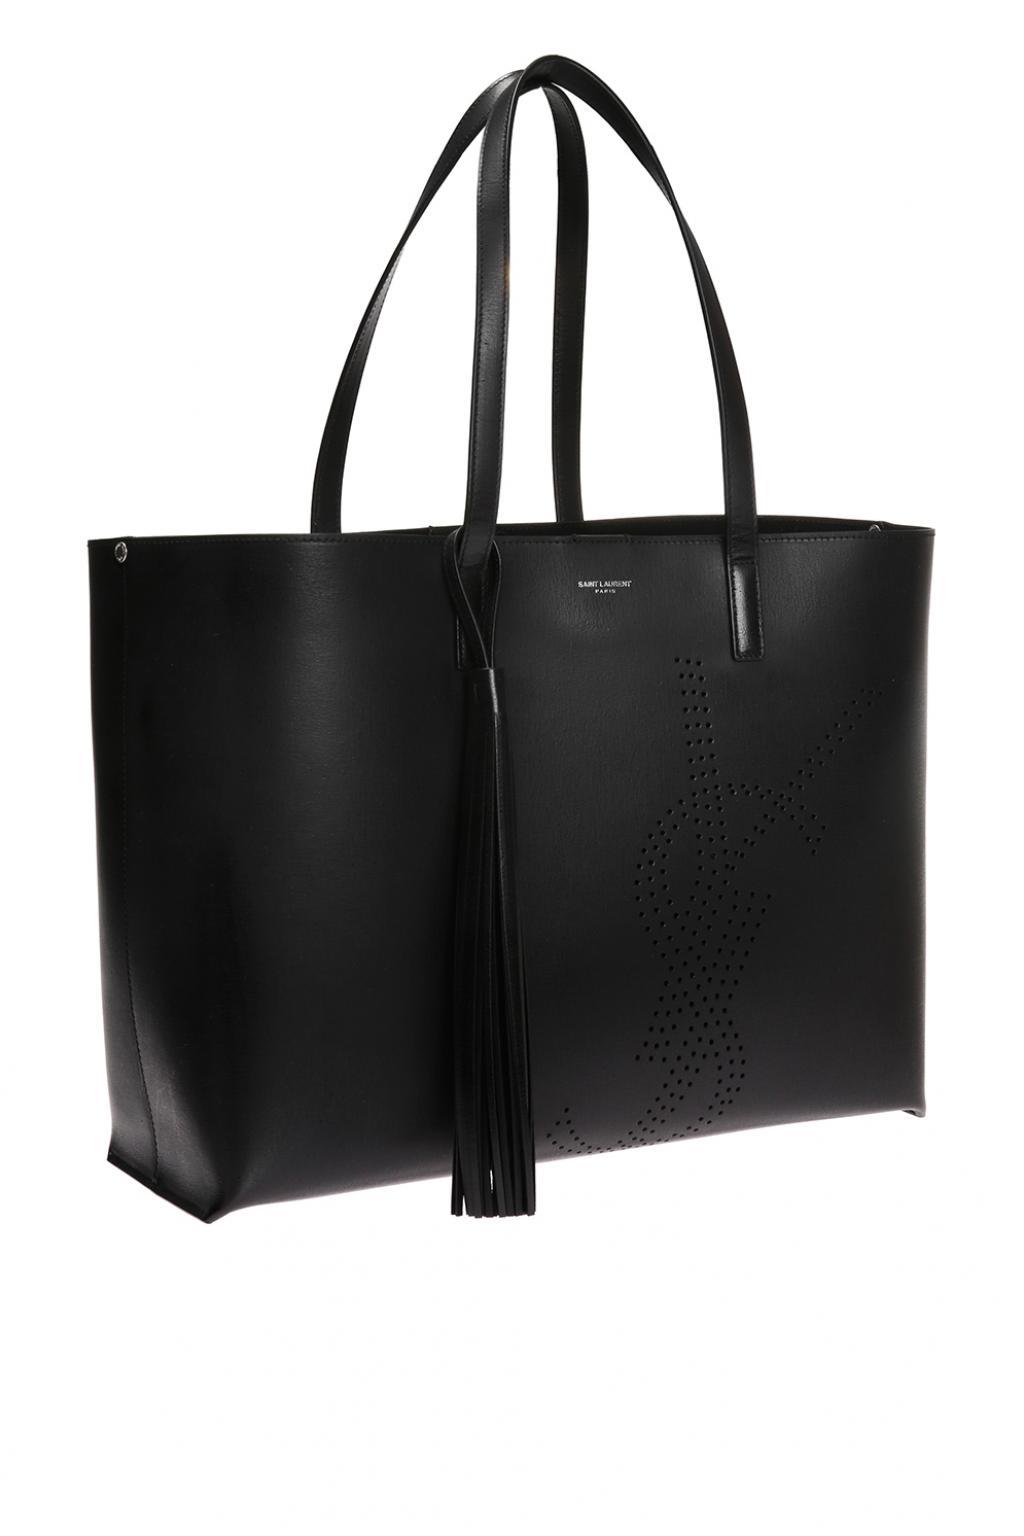 Saint Laurent Perforated Shopping East-West Tote Bag - ShopStyle